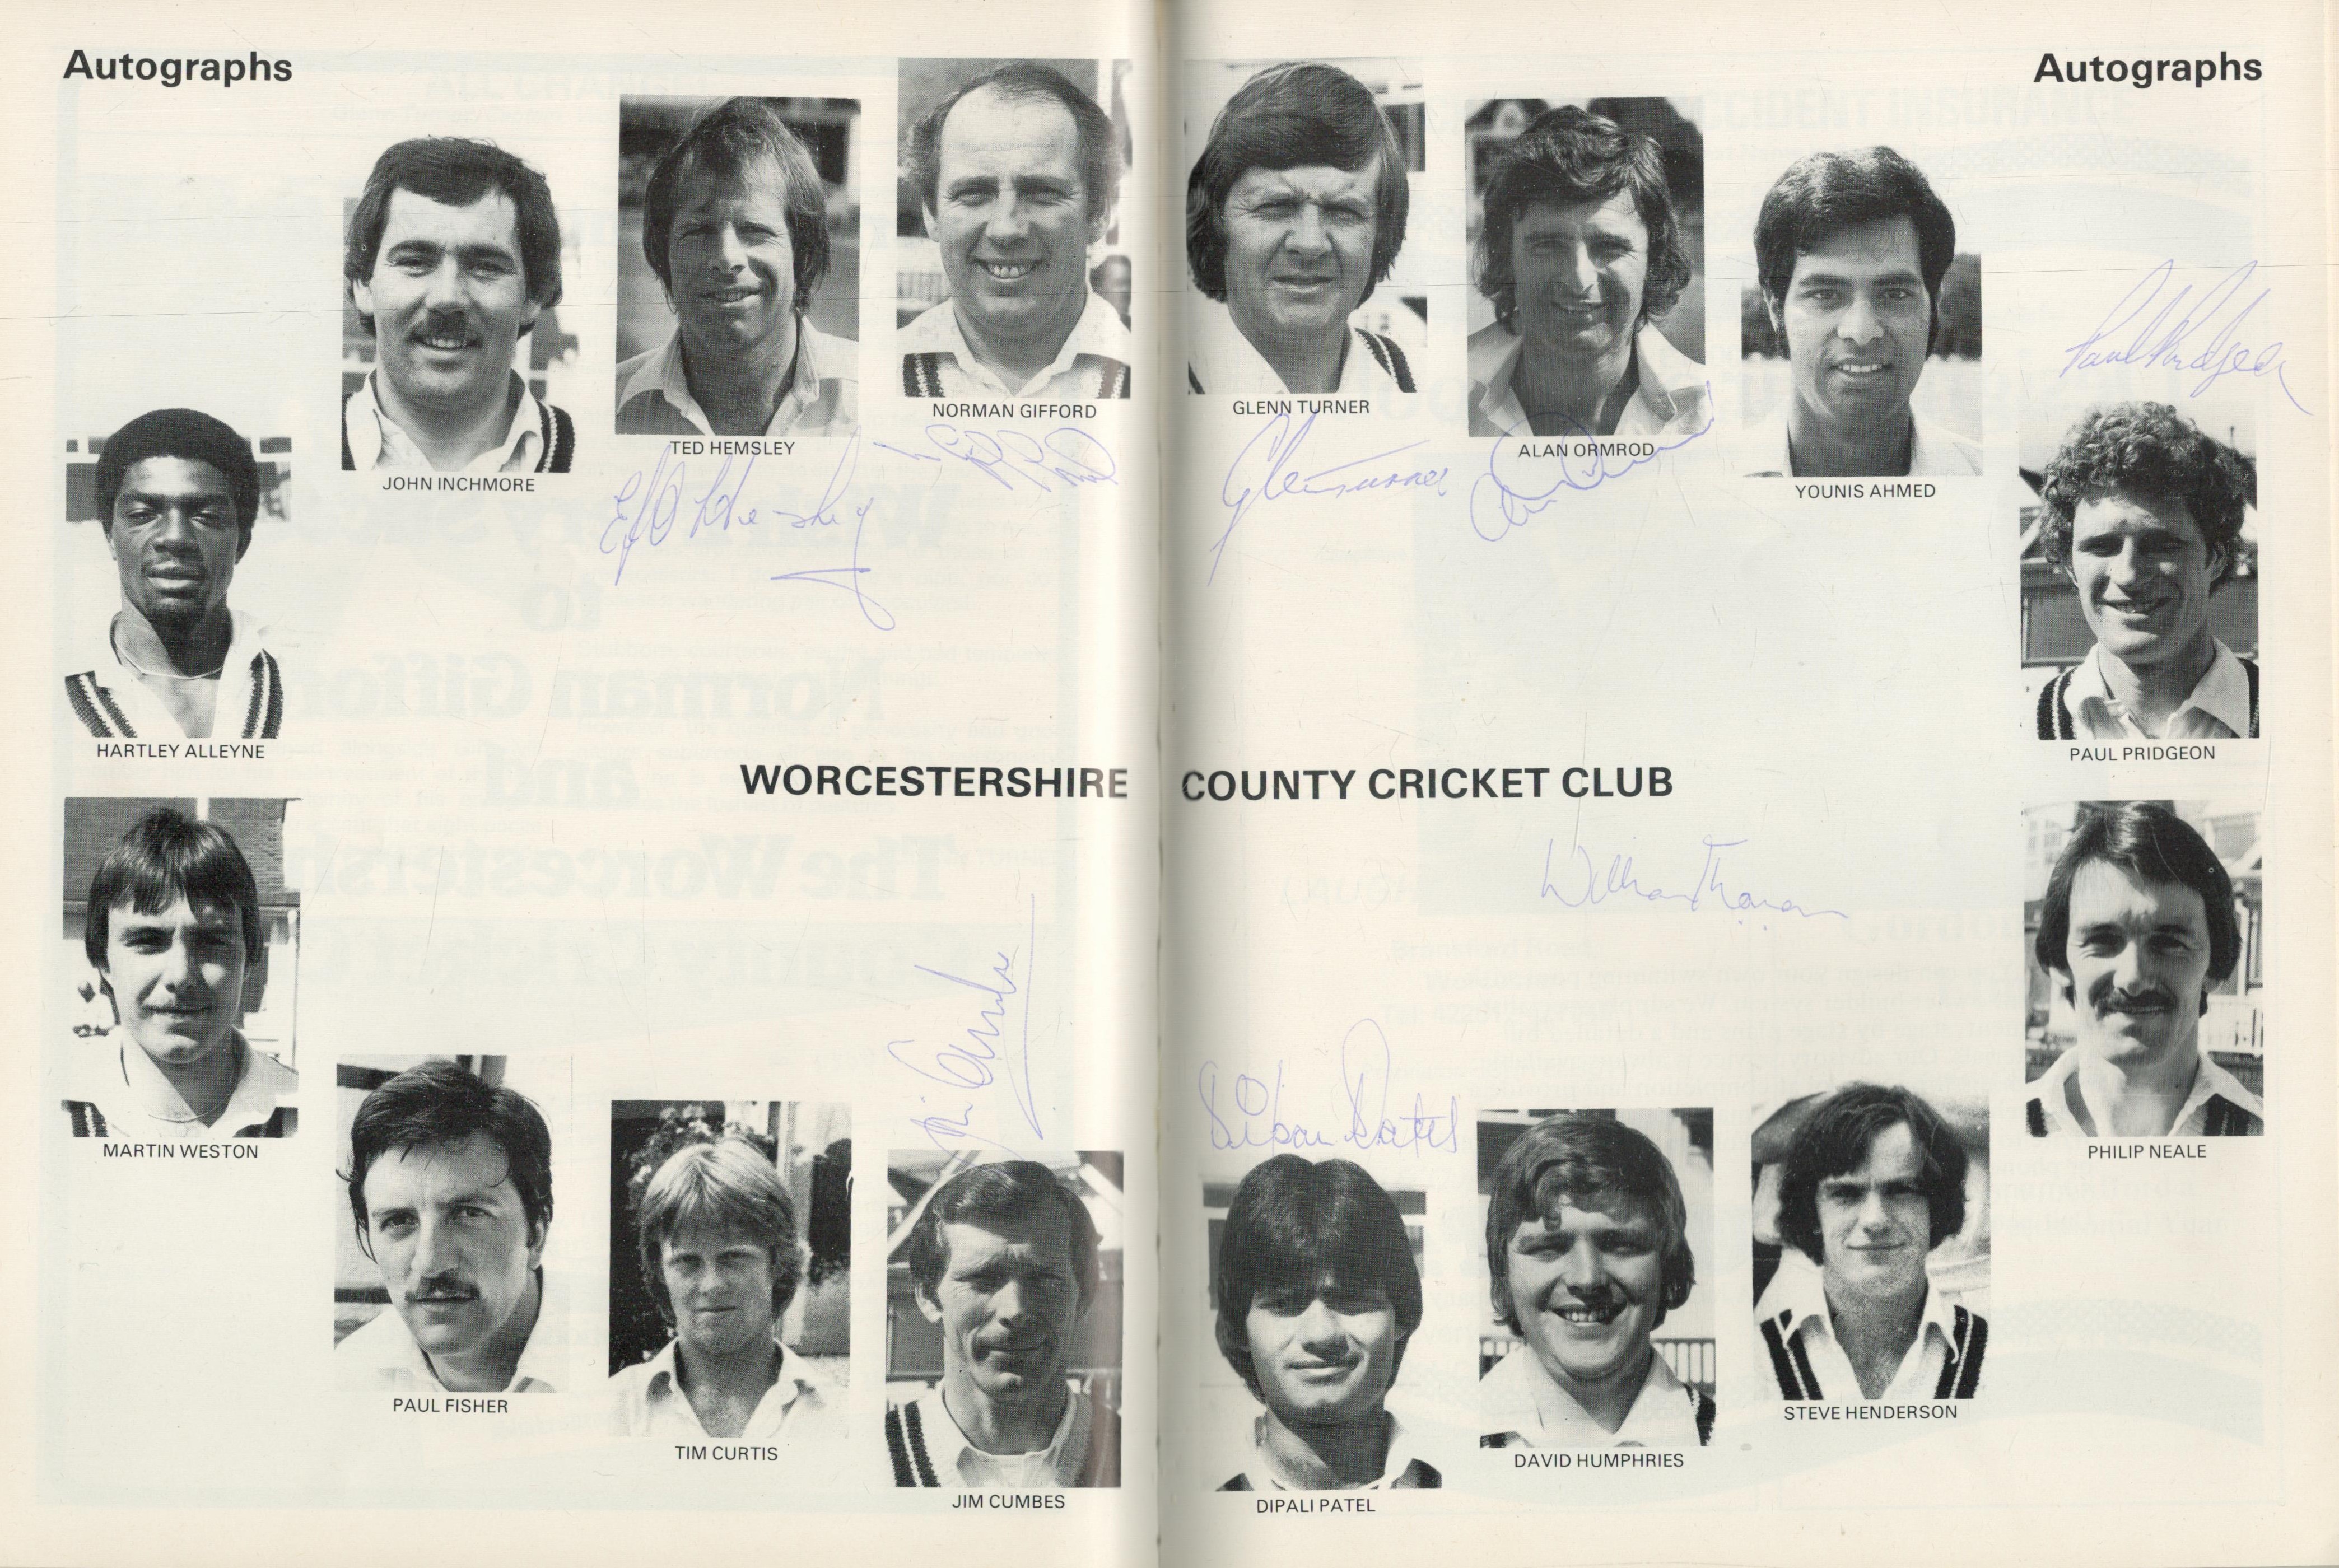 Multi signed signatures such as Ted Hemsley, Norman Gifford, Glenn Turner, Alan Ormrod, Paul